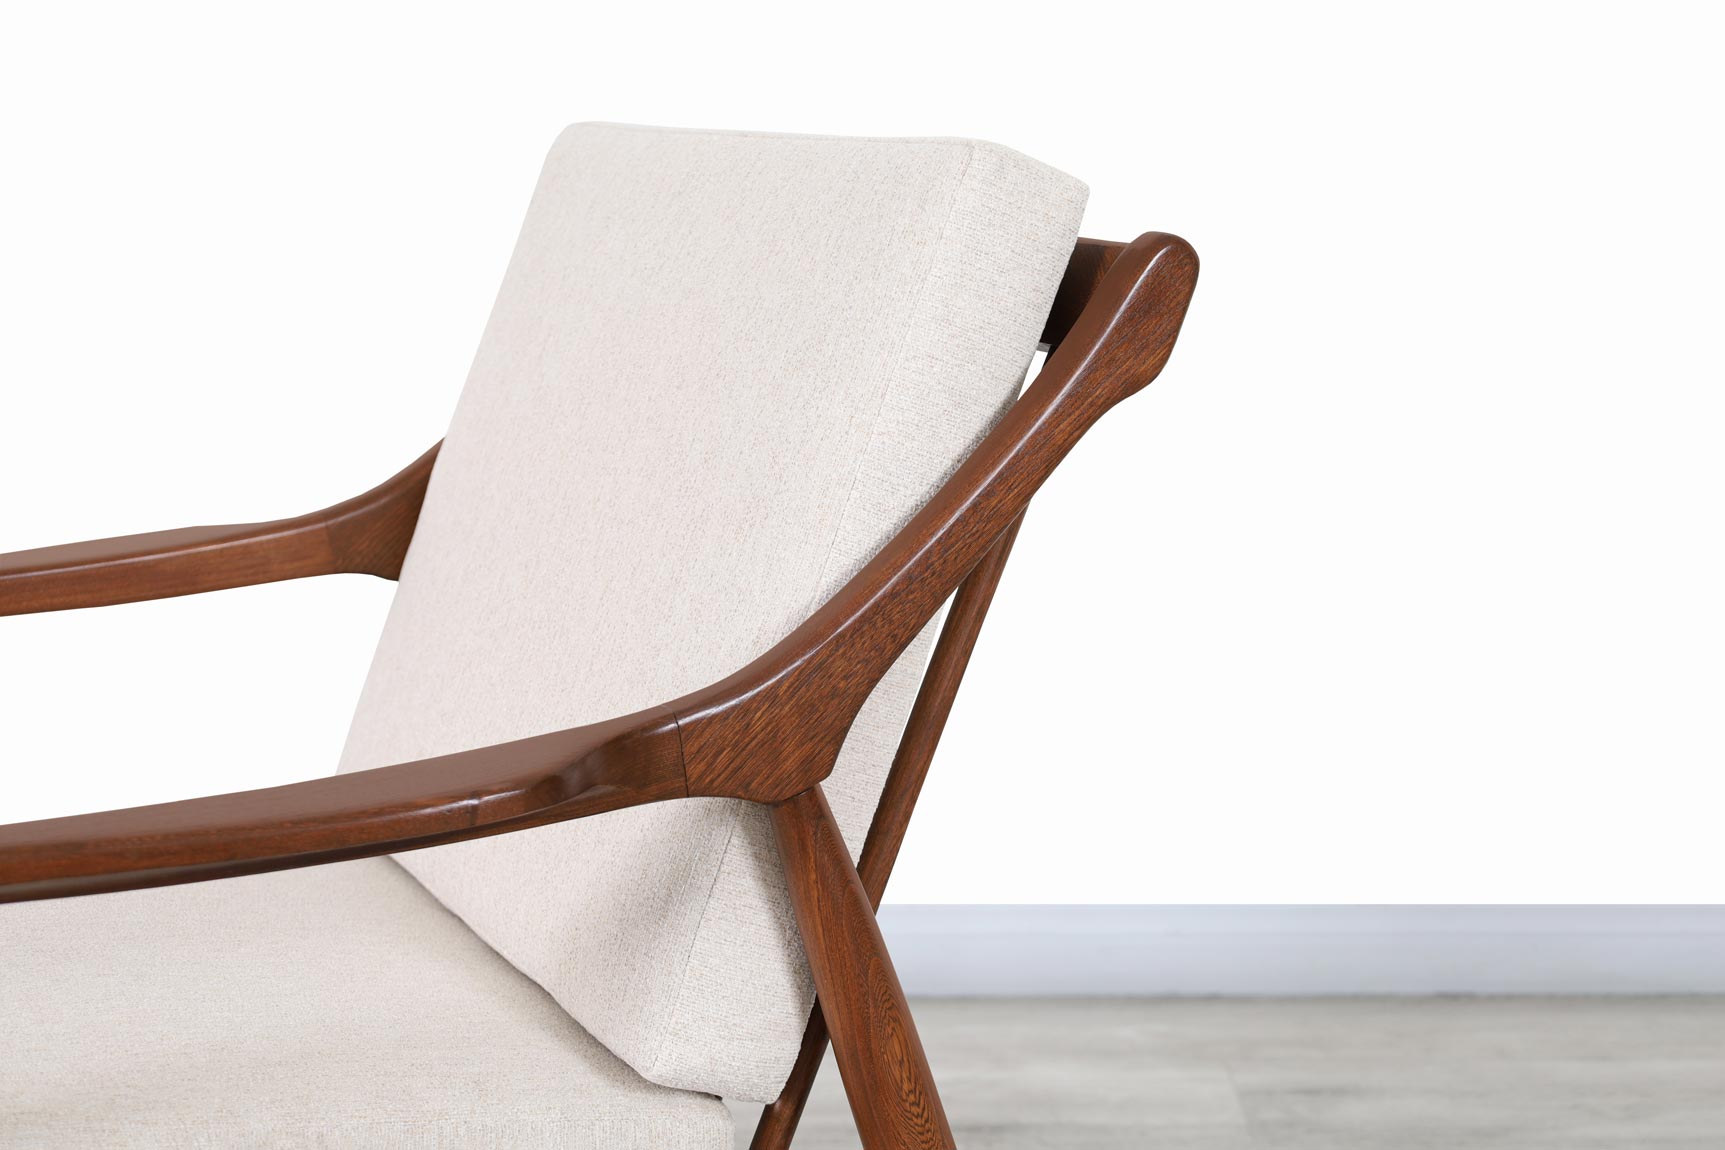 Mid Century Walnut Lounge Chairs by Milo Baughman for James Inc.